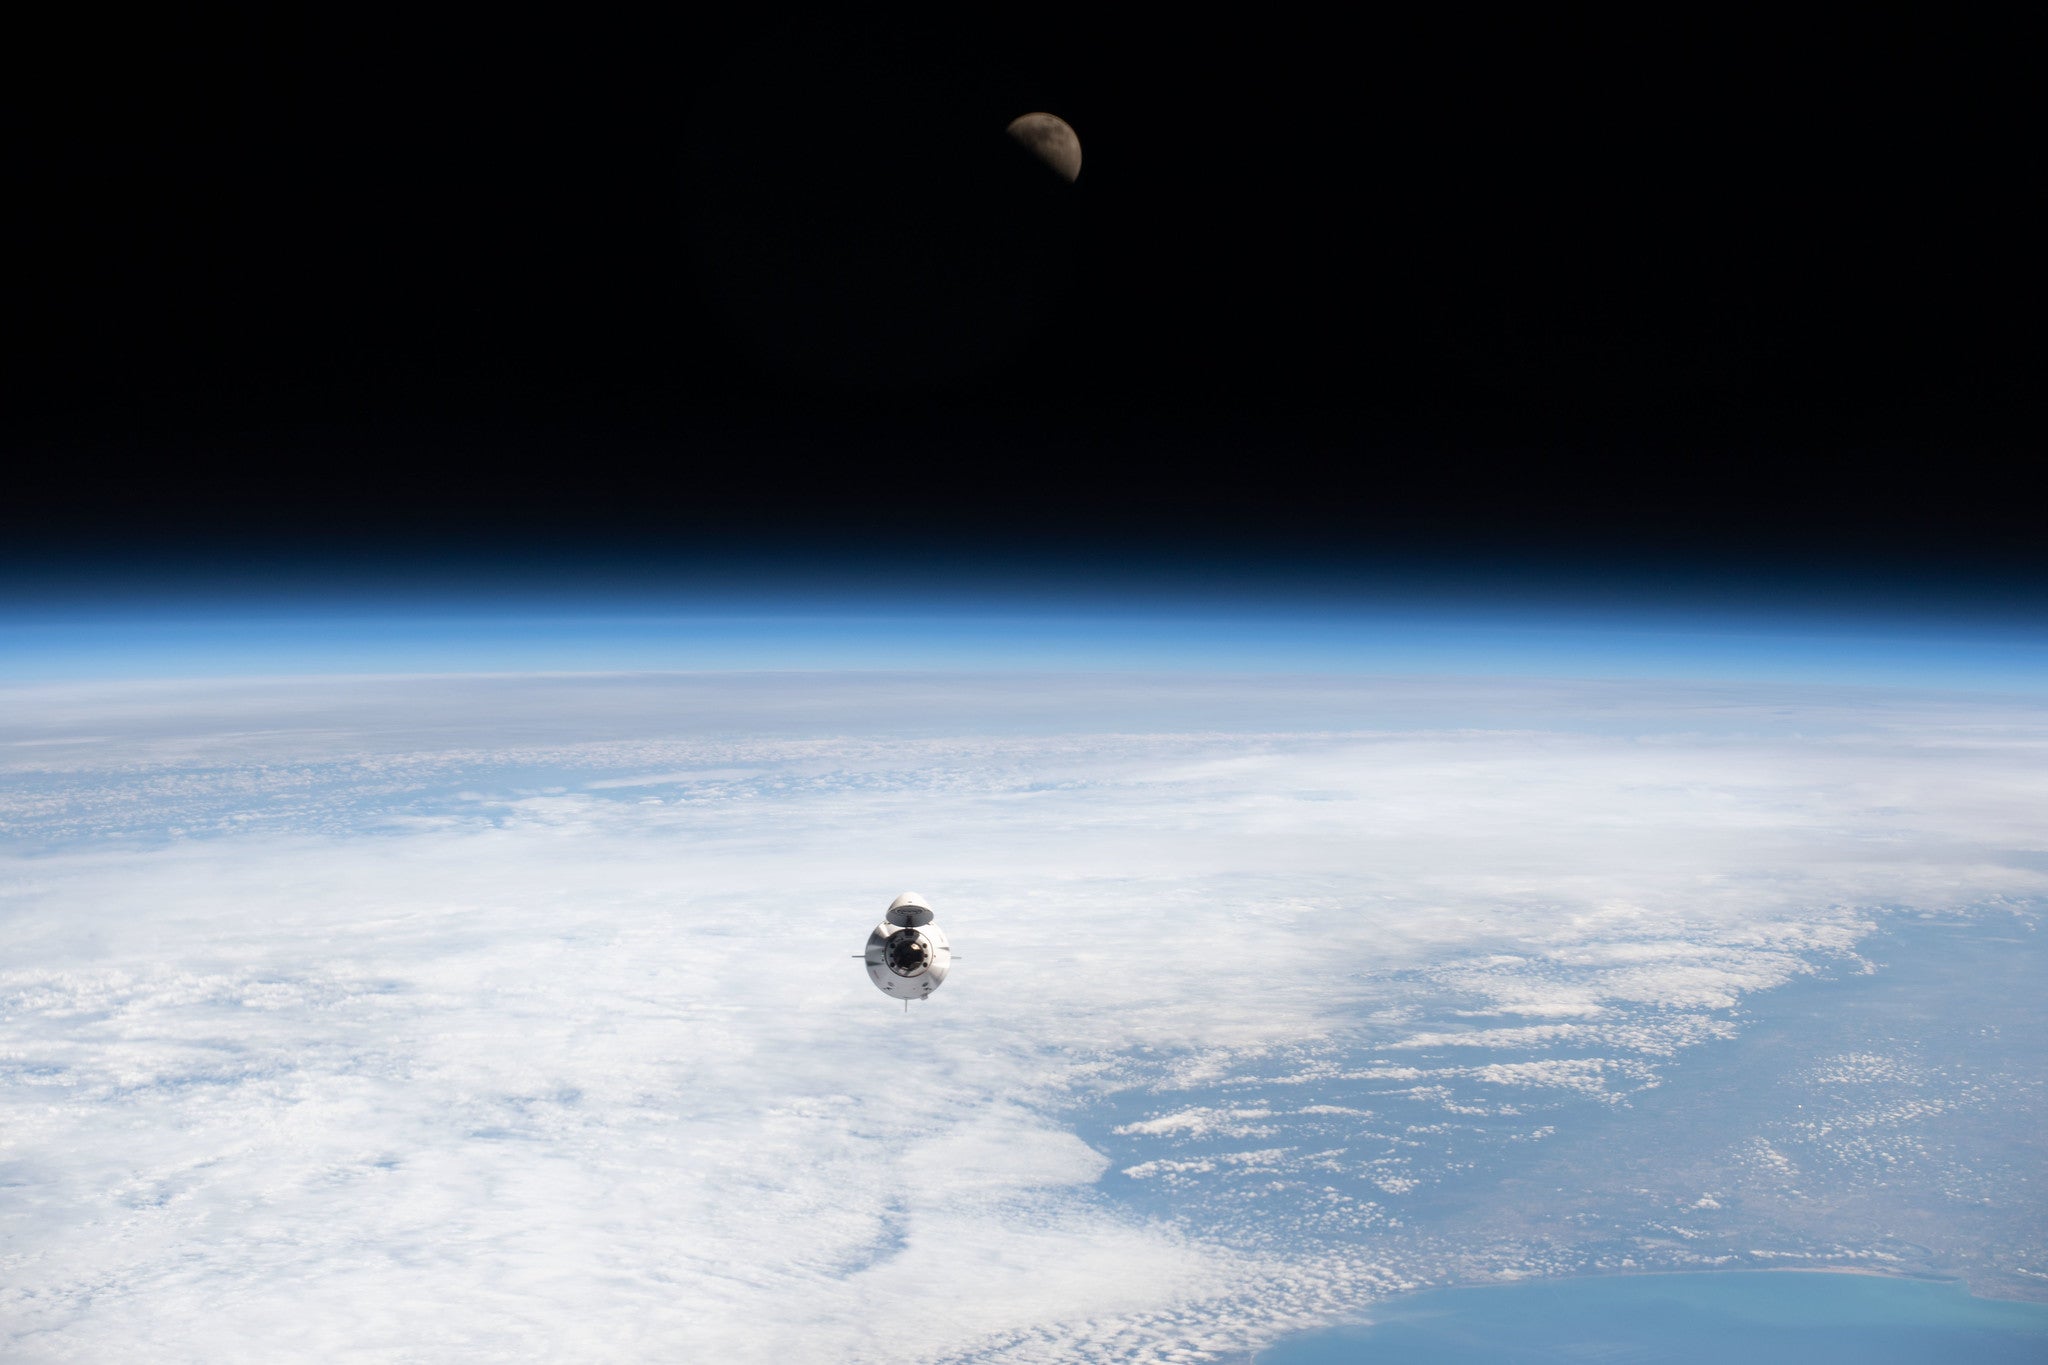 Axiom-1 mission approaching the ISS, April 8, 2022. (Photo: NASA)